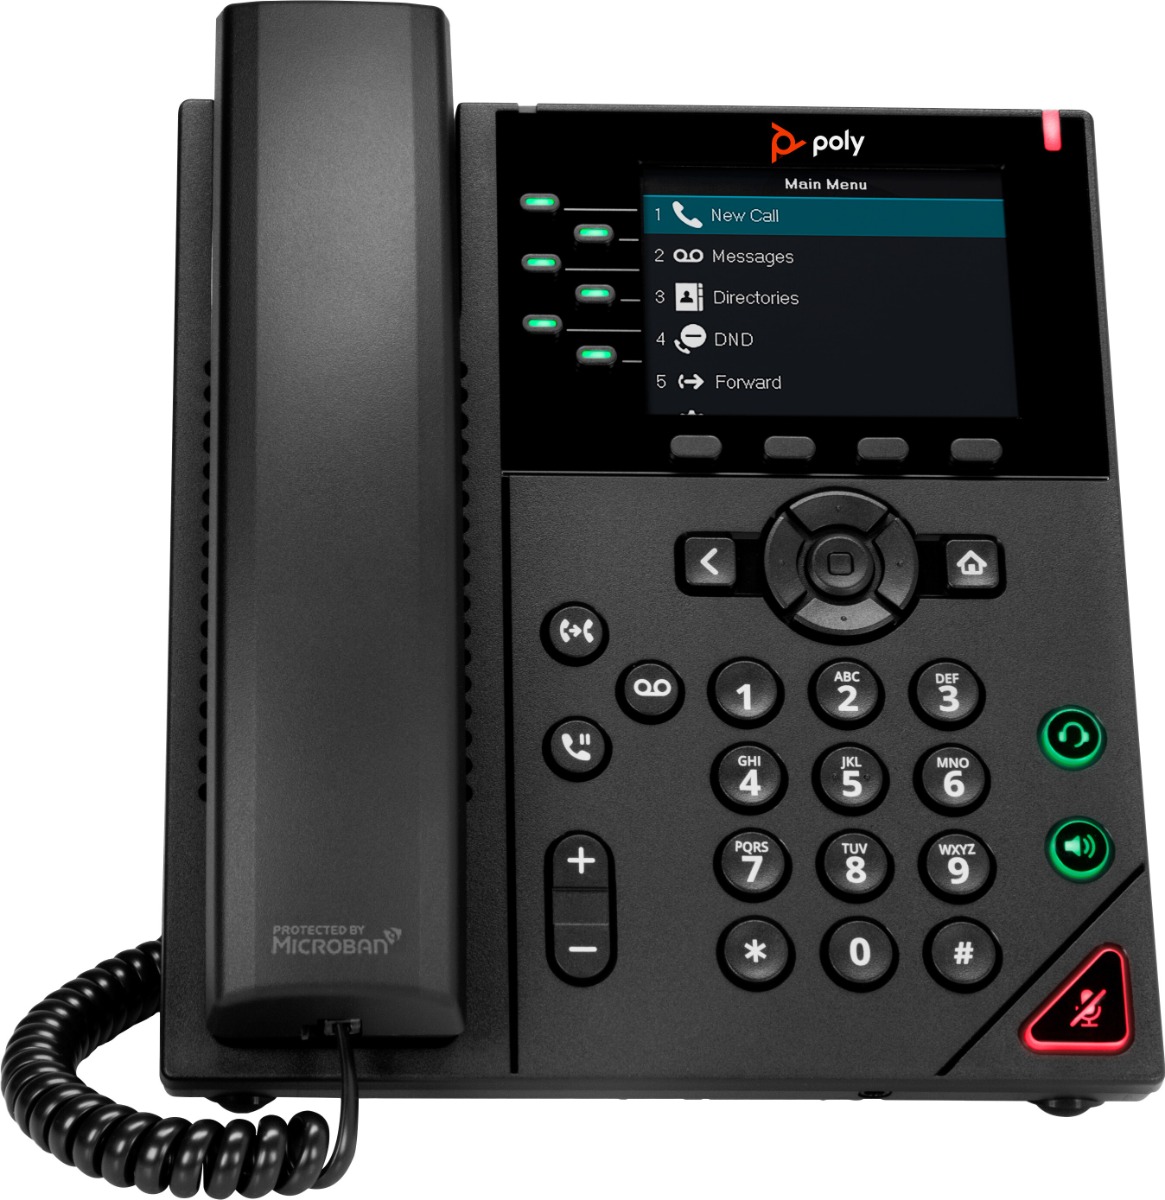 How much is the MSRP for the Polycom VVX 350 6-Line Color IP Desktop Phone?